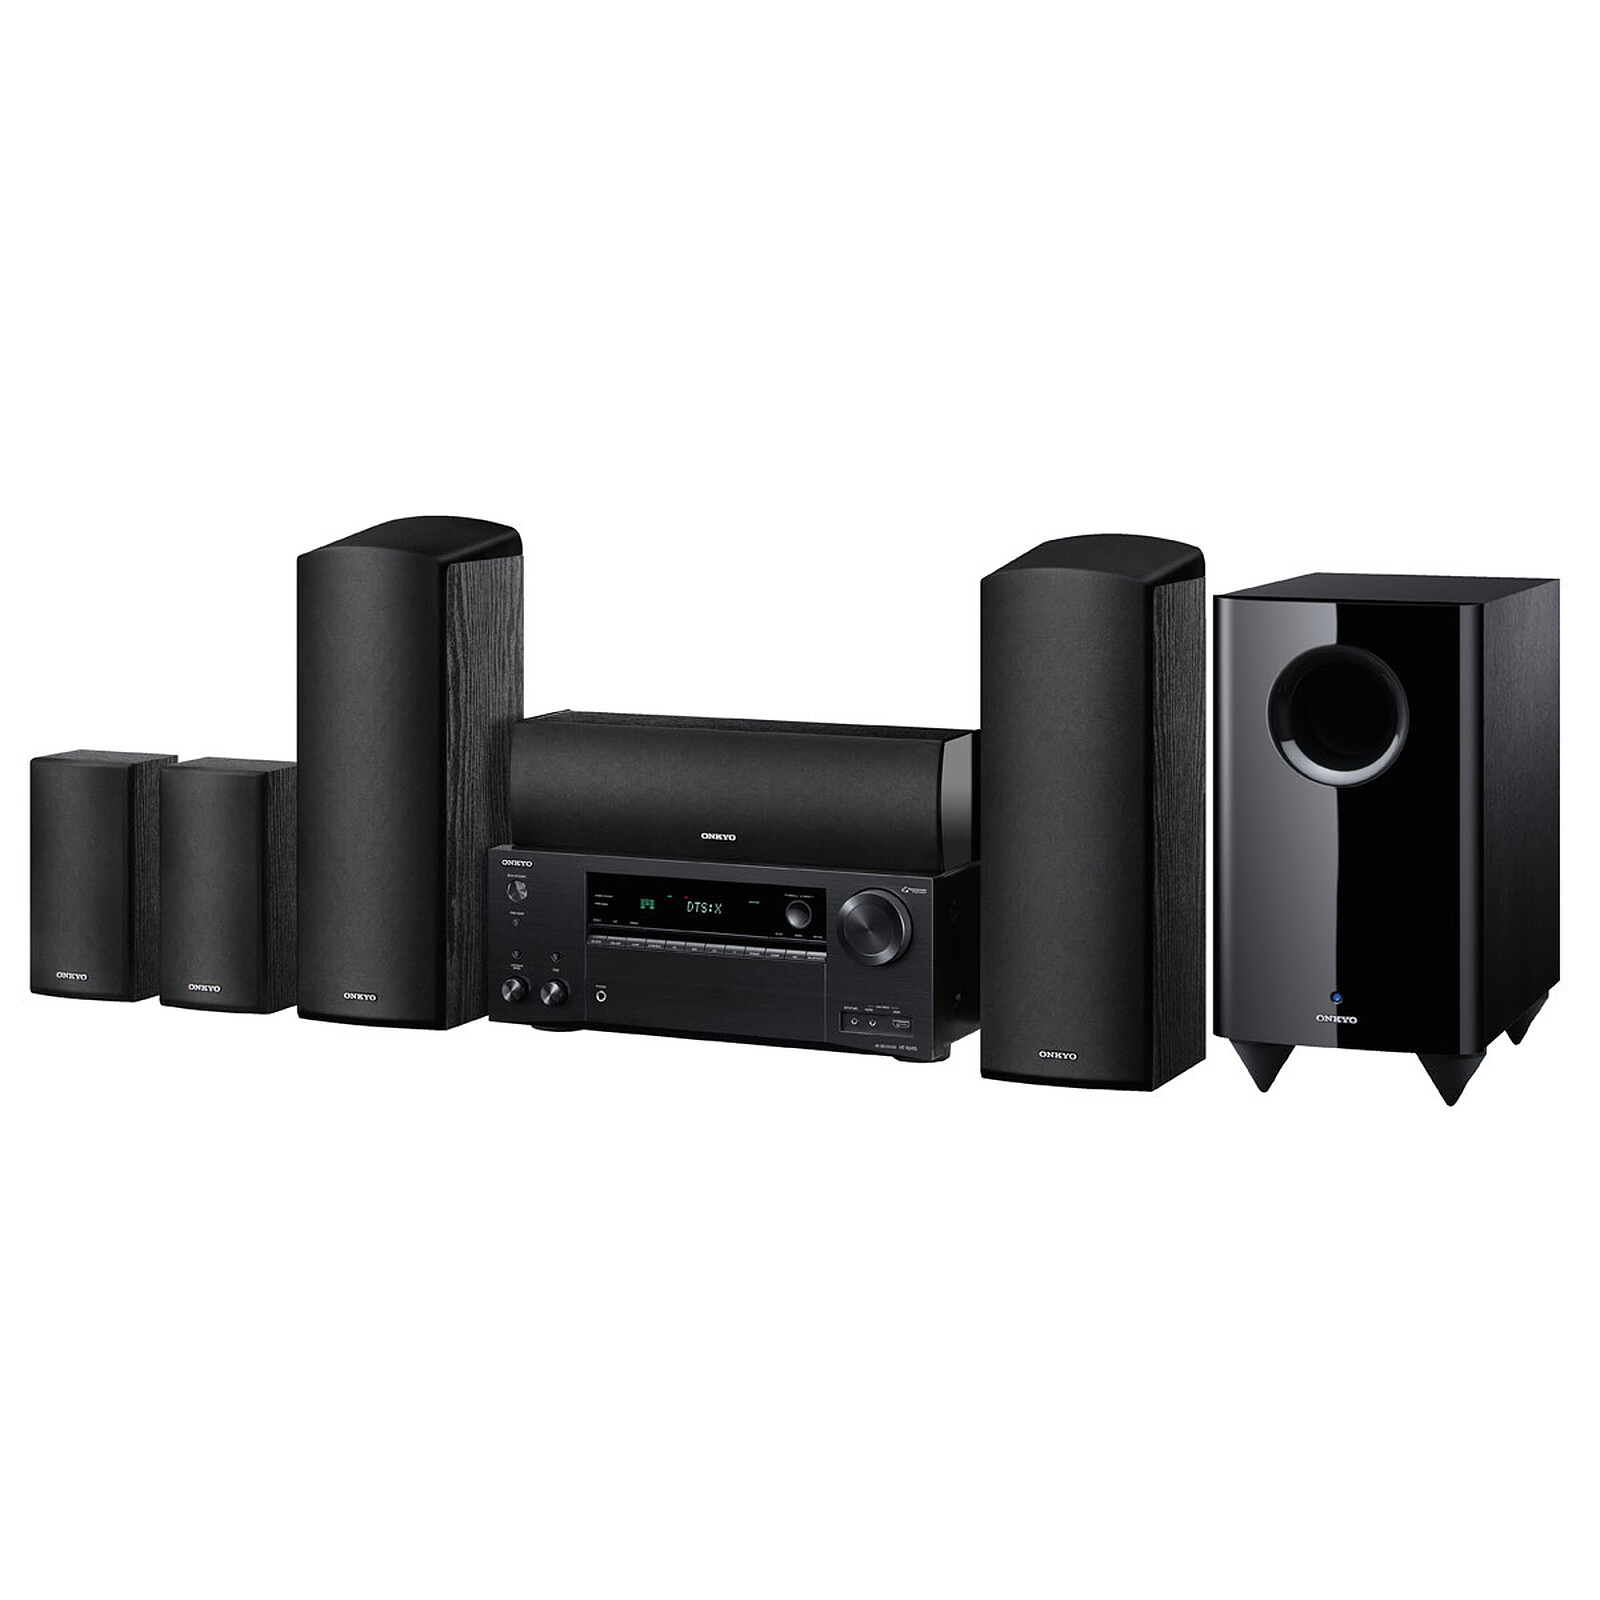 Pioneer VSX-534D Black + JBL Pack Stage 5.1 A180 Black - Home theater  system - LDLC 3-year warranty